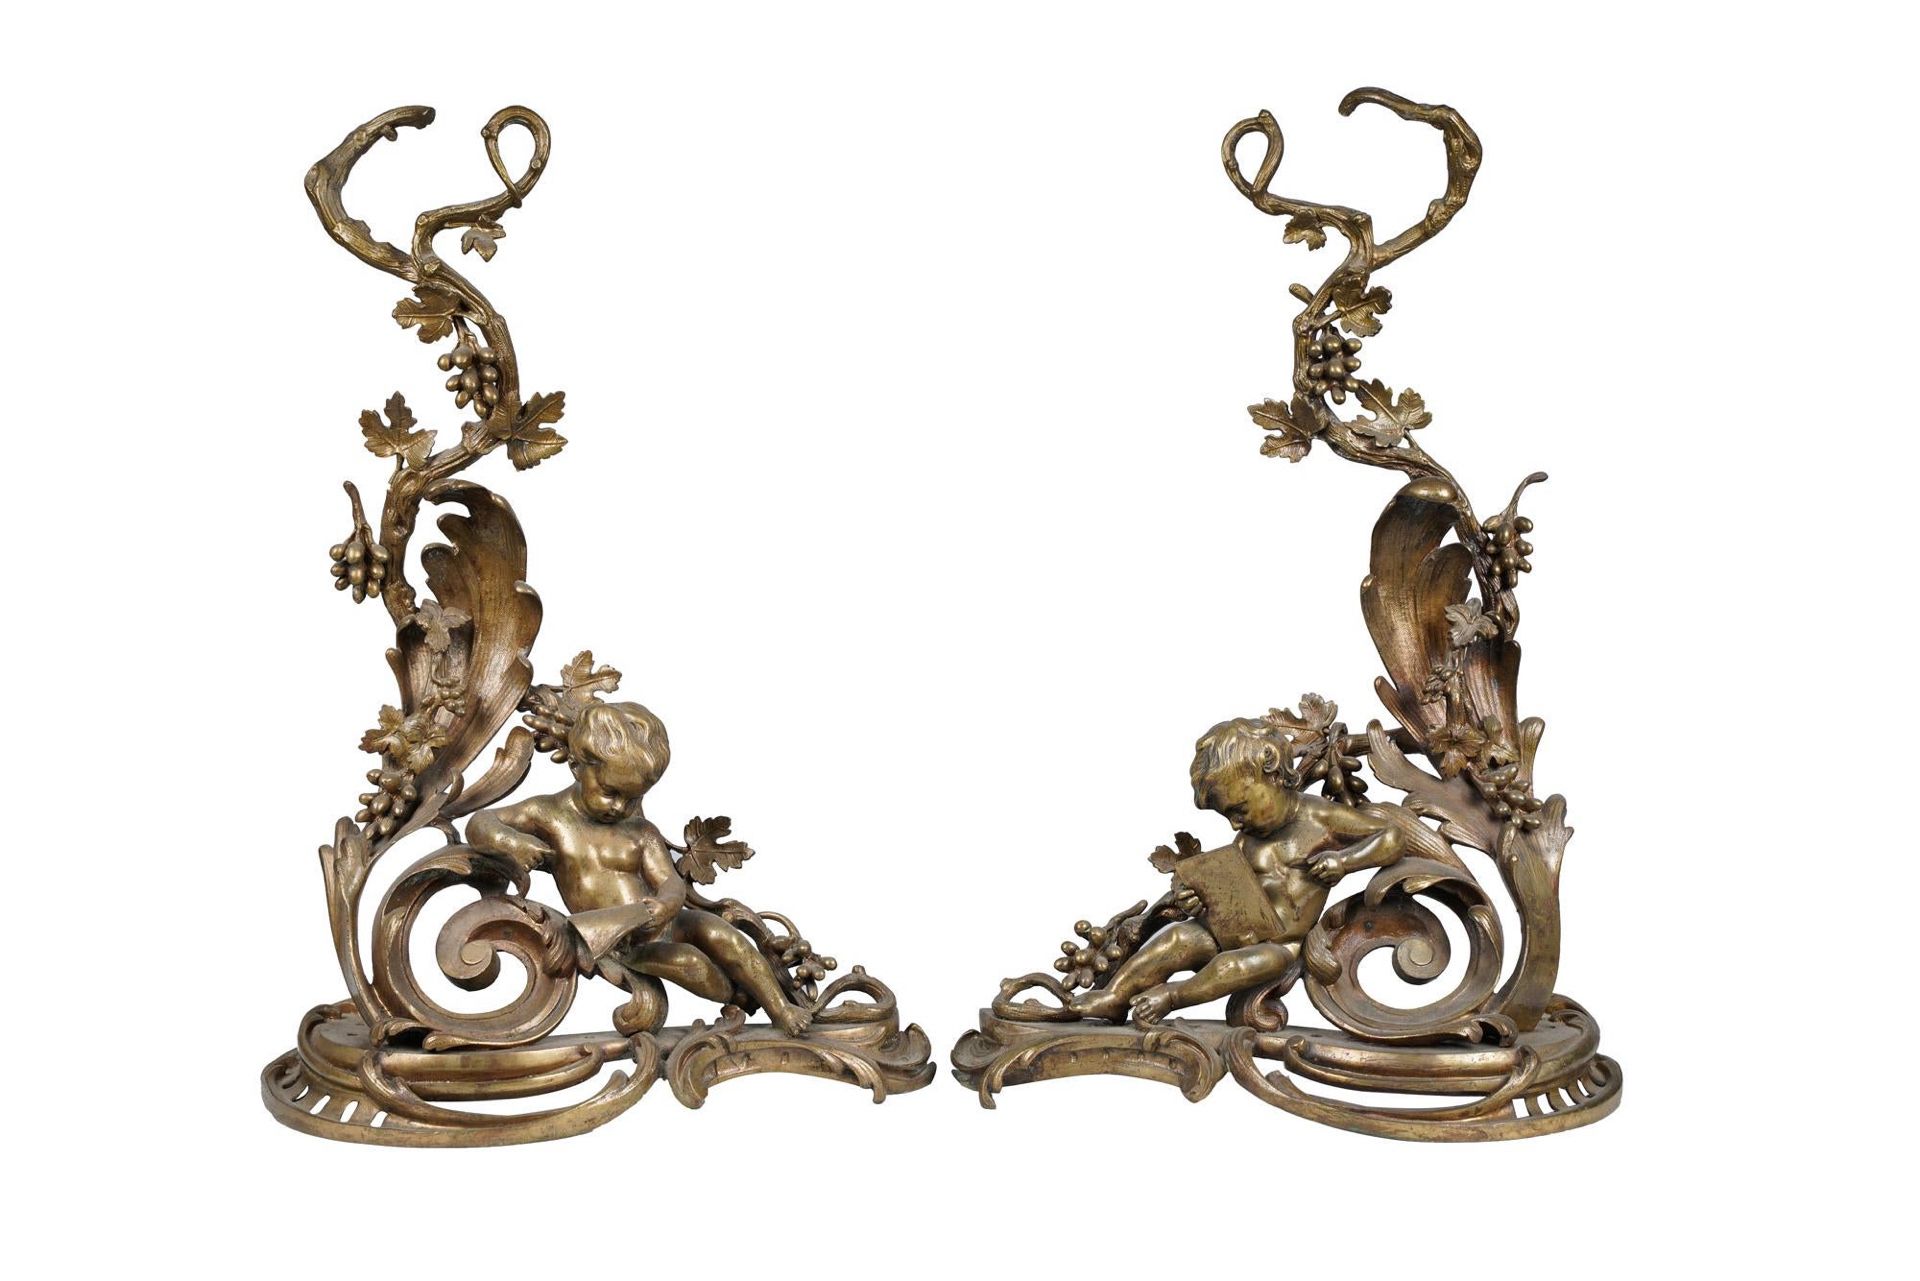 PAIR OF FRENCH RENAISSANCE REVIVAL BRASS CANDELABRA